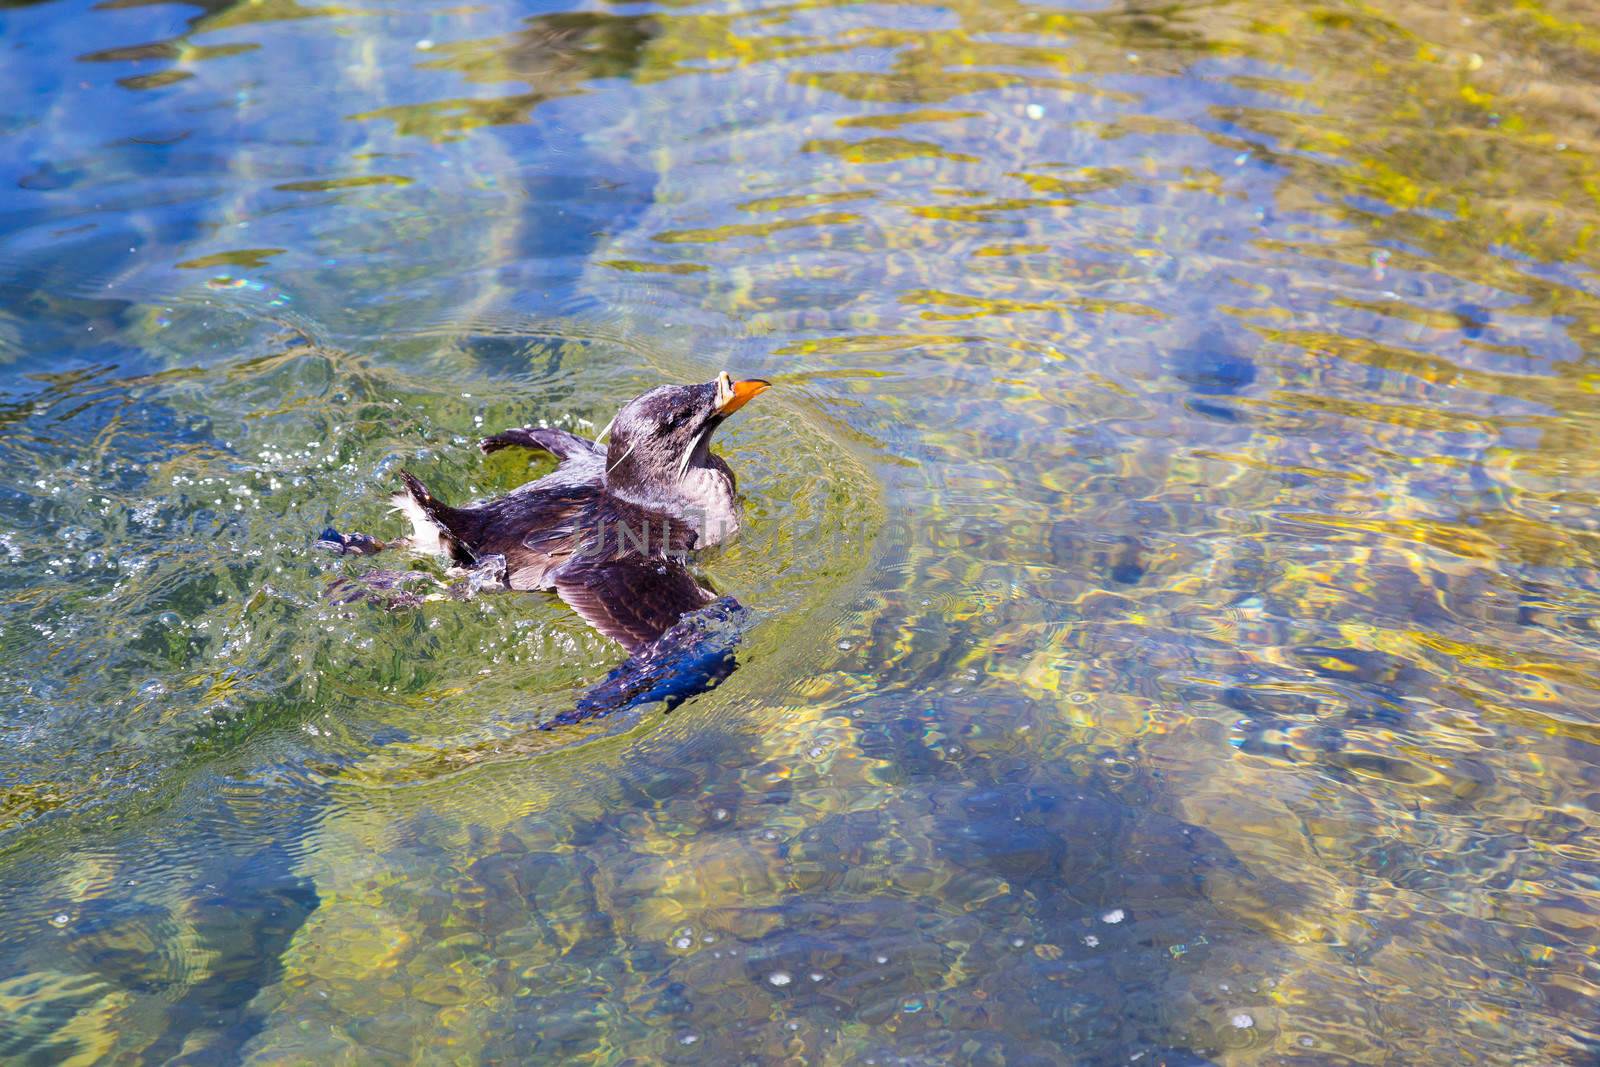 Waterfowl at Zoo in Water by joshuaraineyphotography